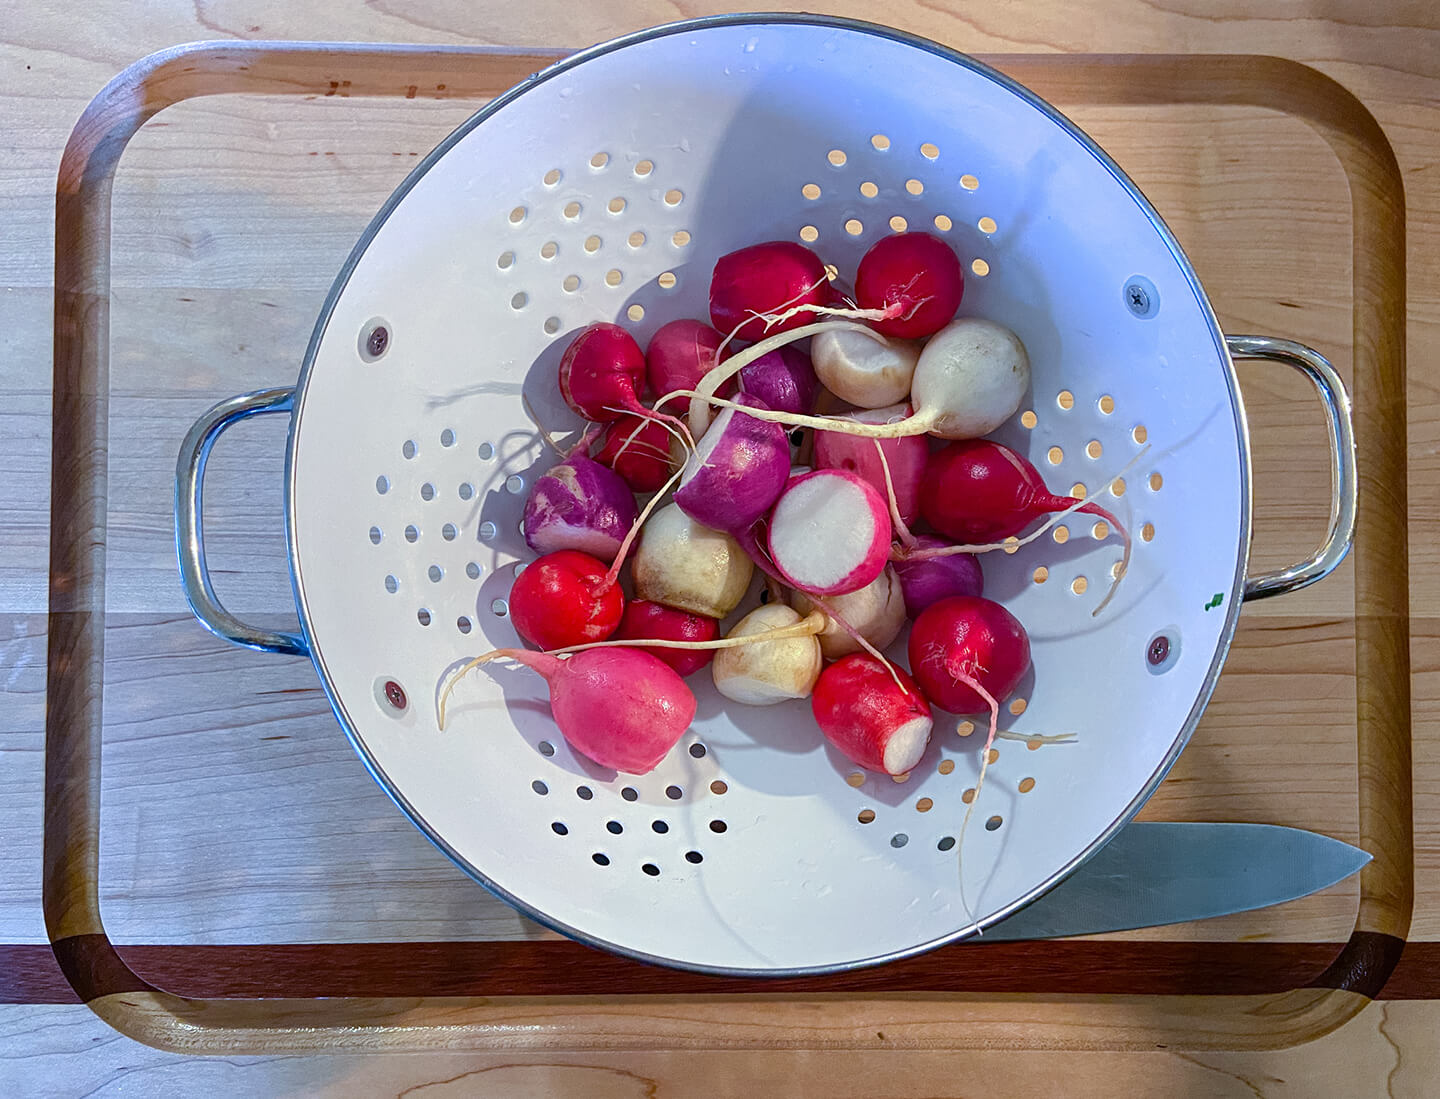 A metal strainer filled with freshly cleaned, whole radishes.